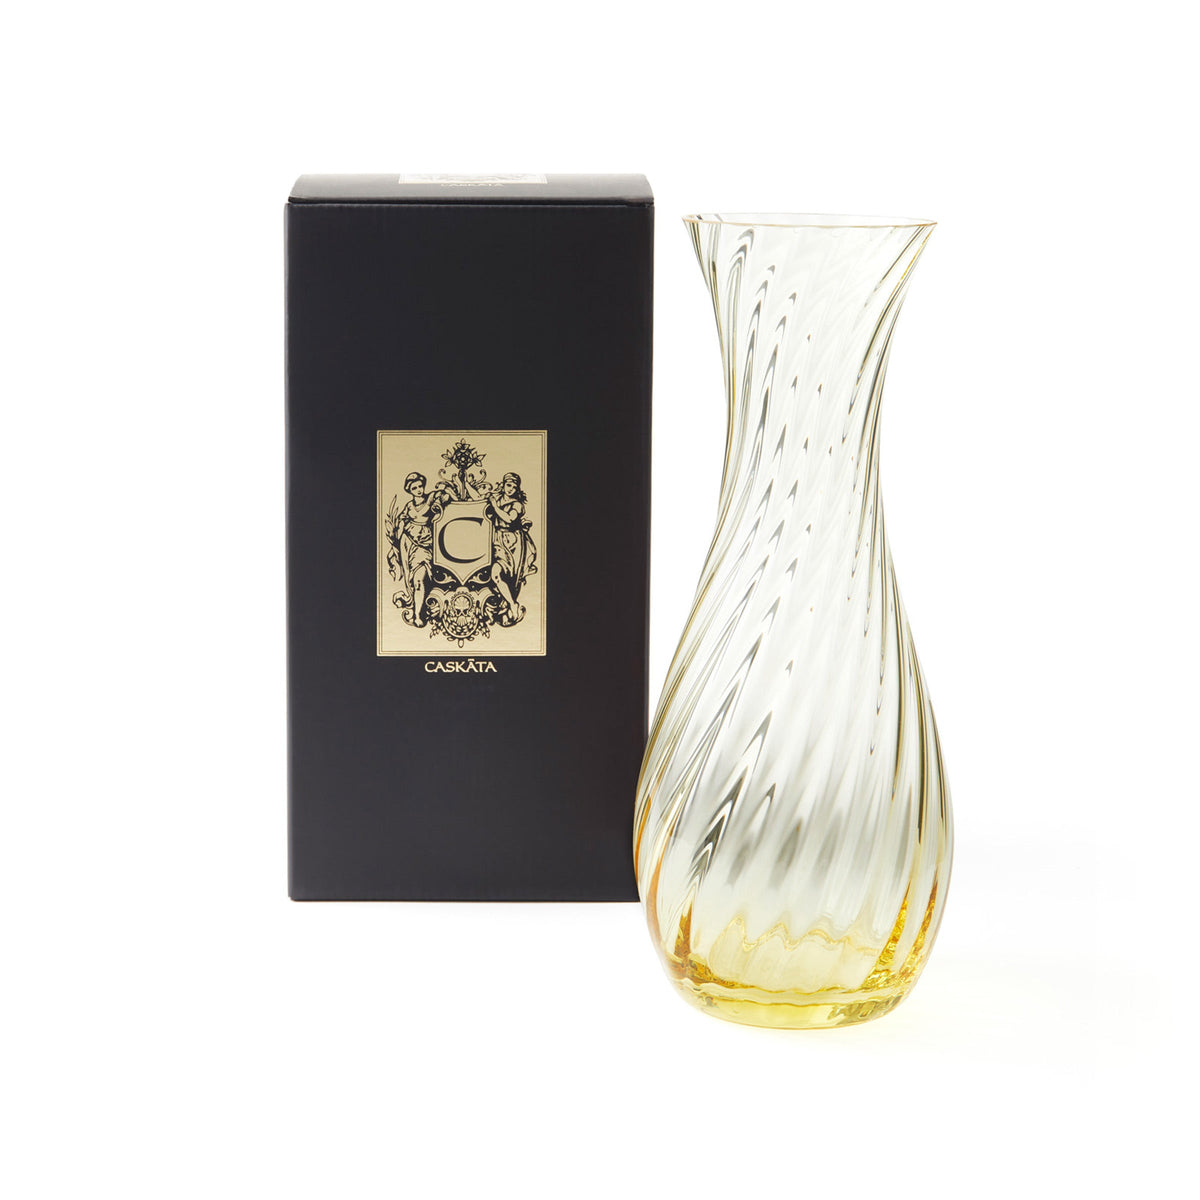 Citrine Quinn Carafe by Caskata with a black and gold gift box.